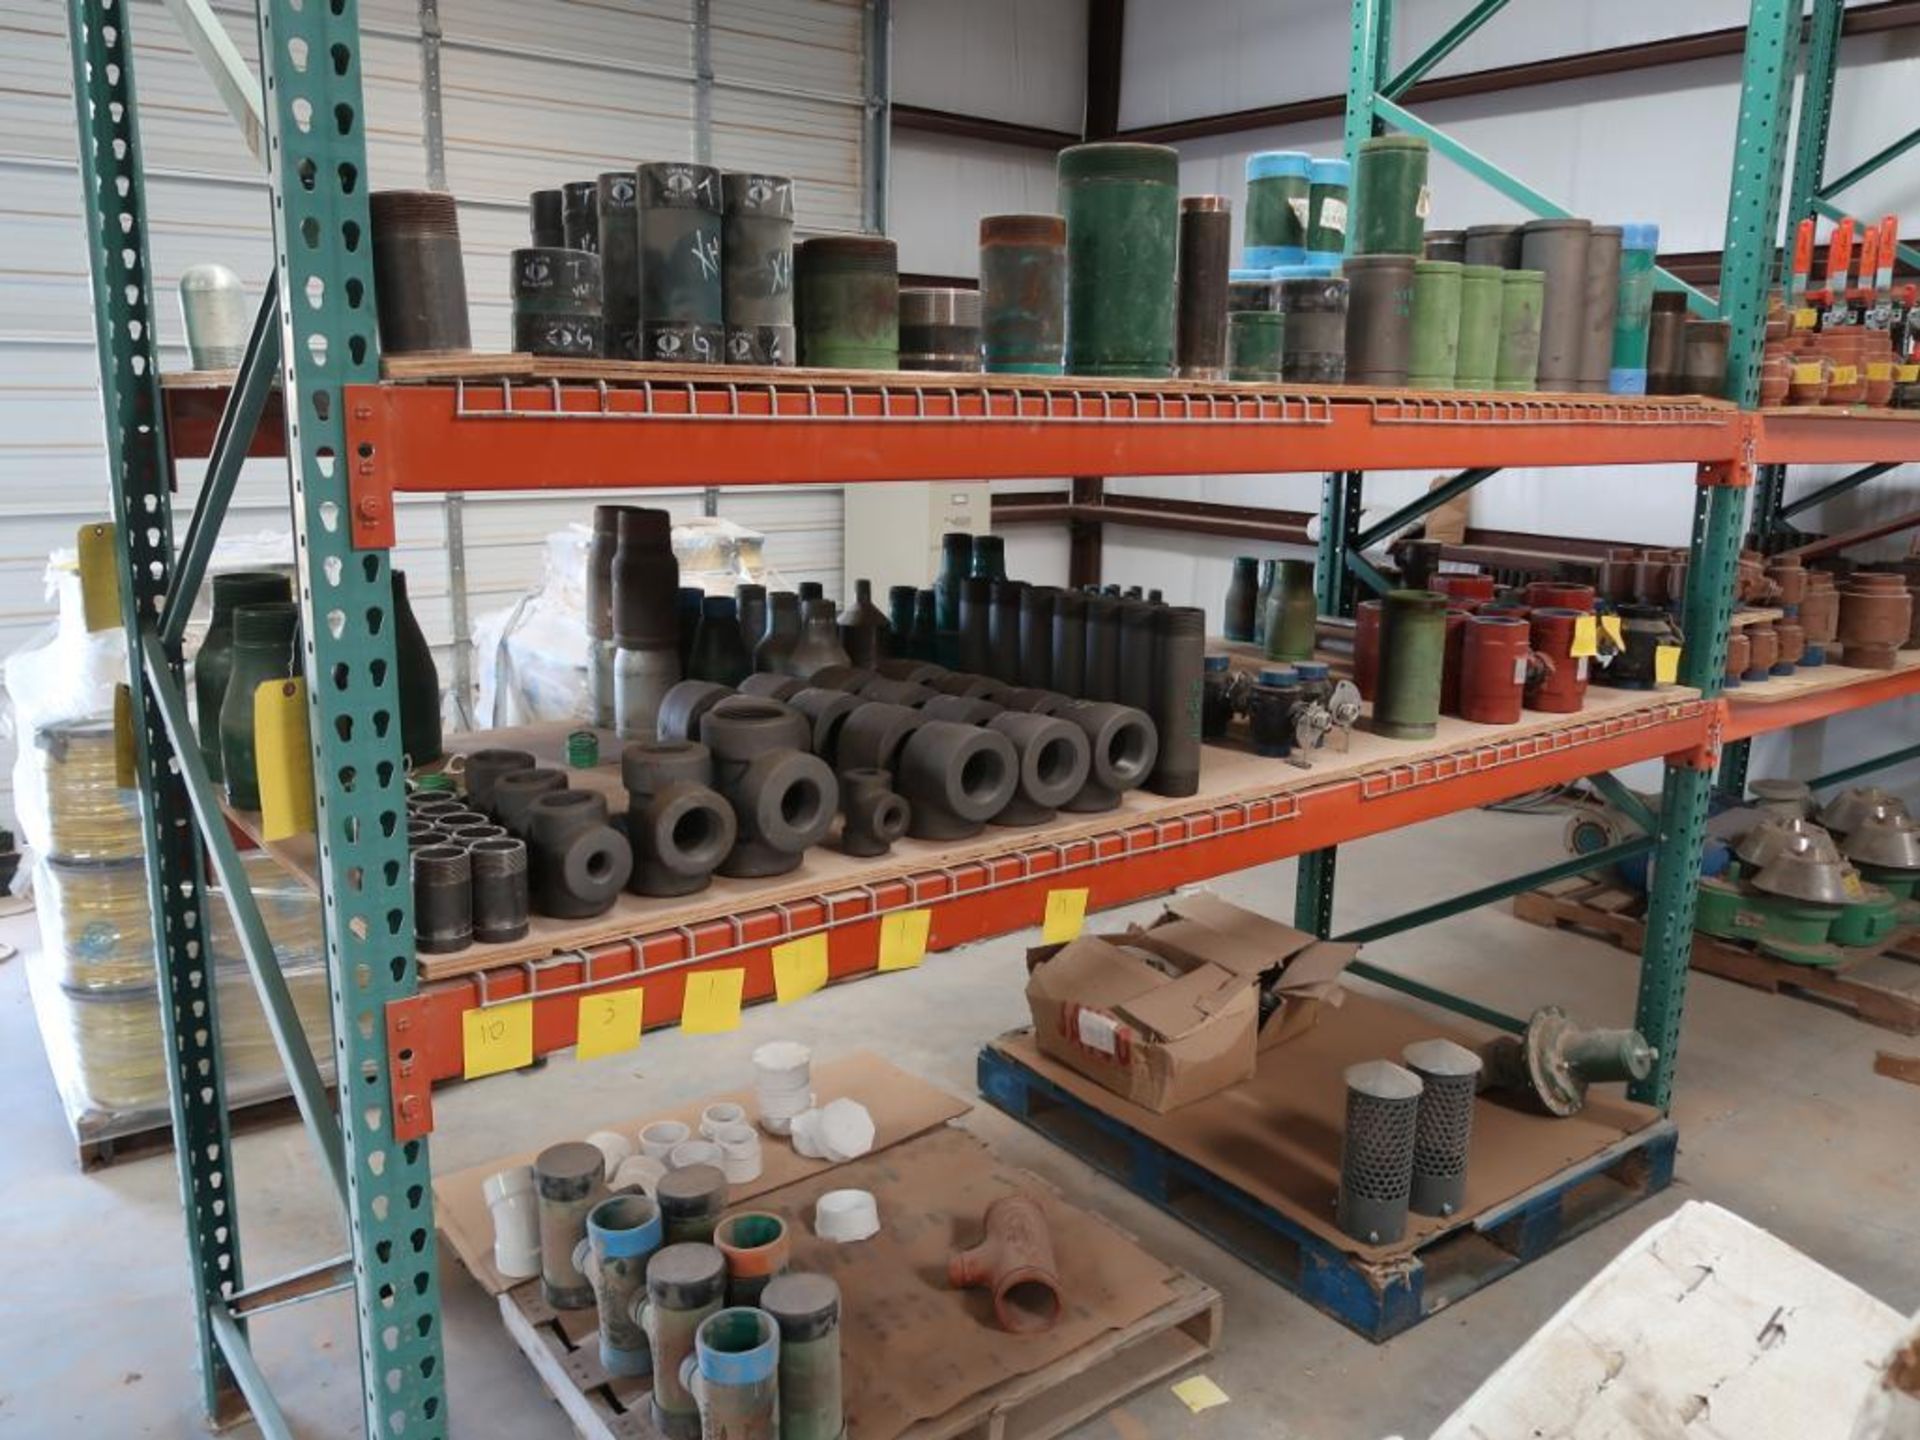 CONTENTS OF (2) SECTIONS OF PALLET RACK - PIPE FITTINGS AND VALVES